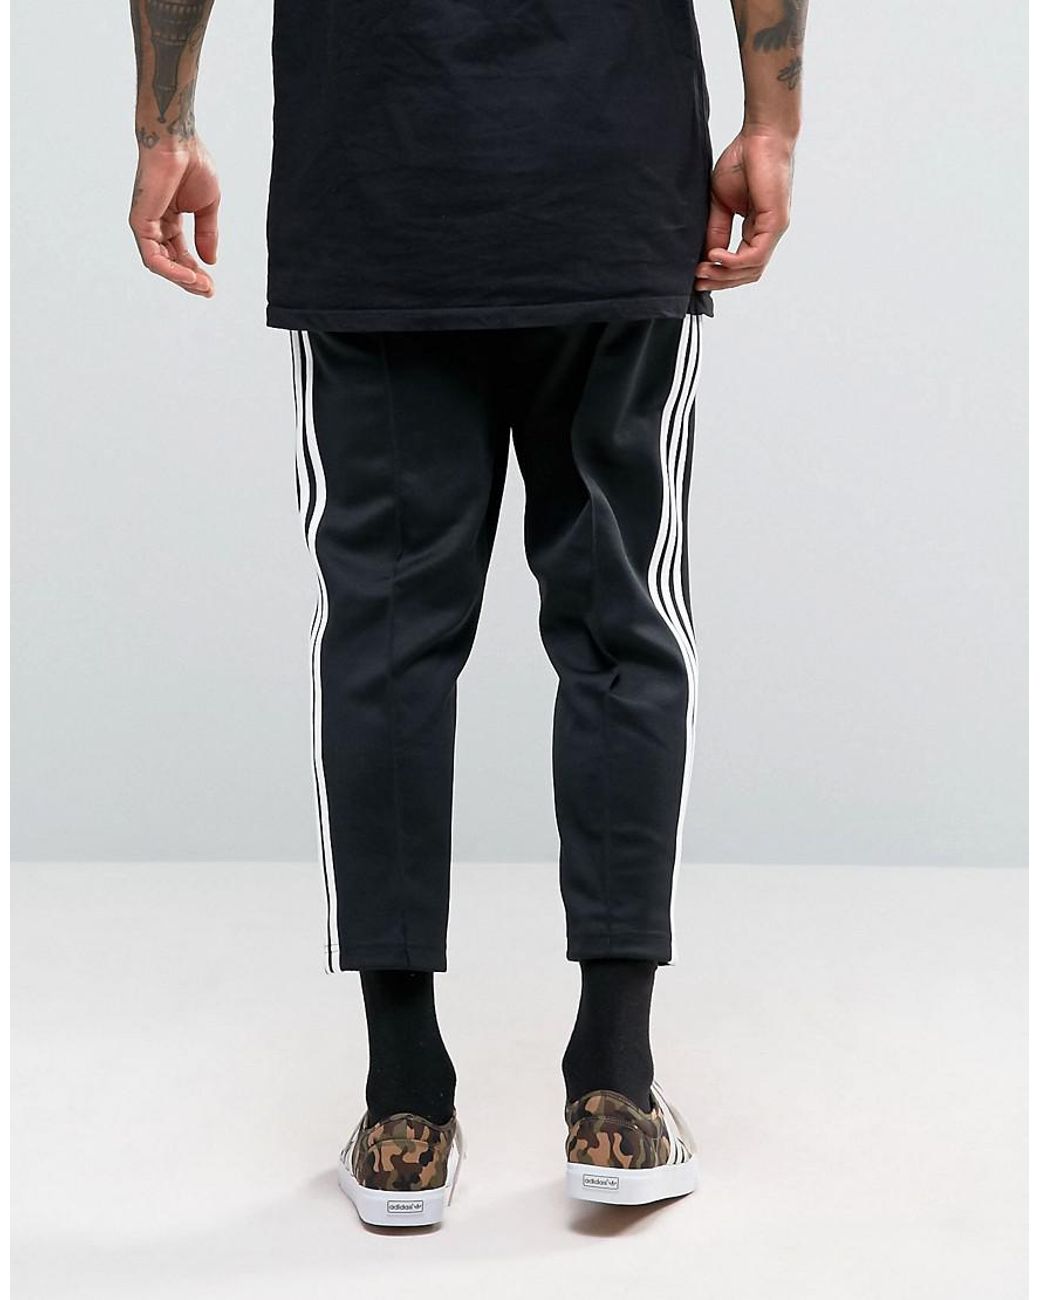 adidas Superstar Relaxed Cropped Track Pant  Pants Adidas superstar Track  pants